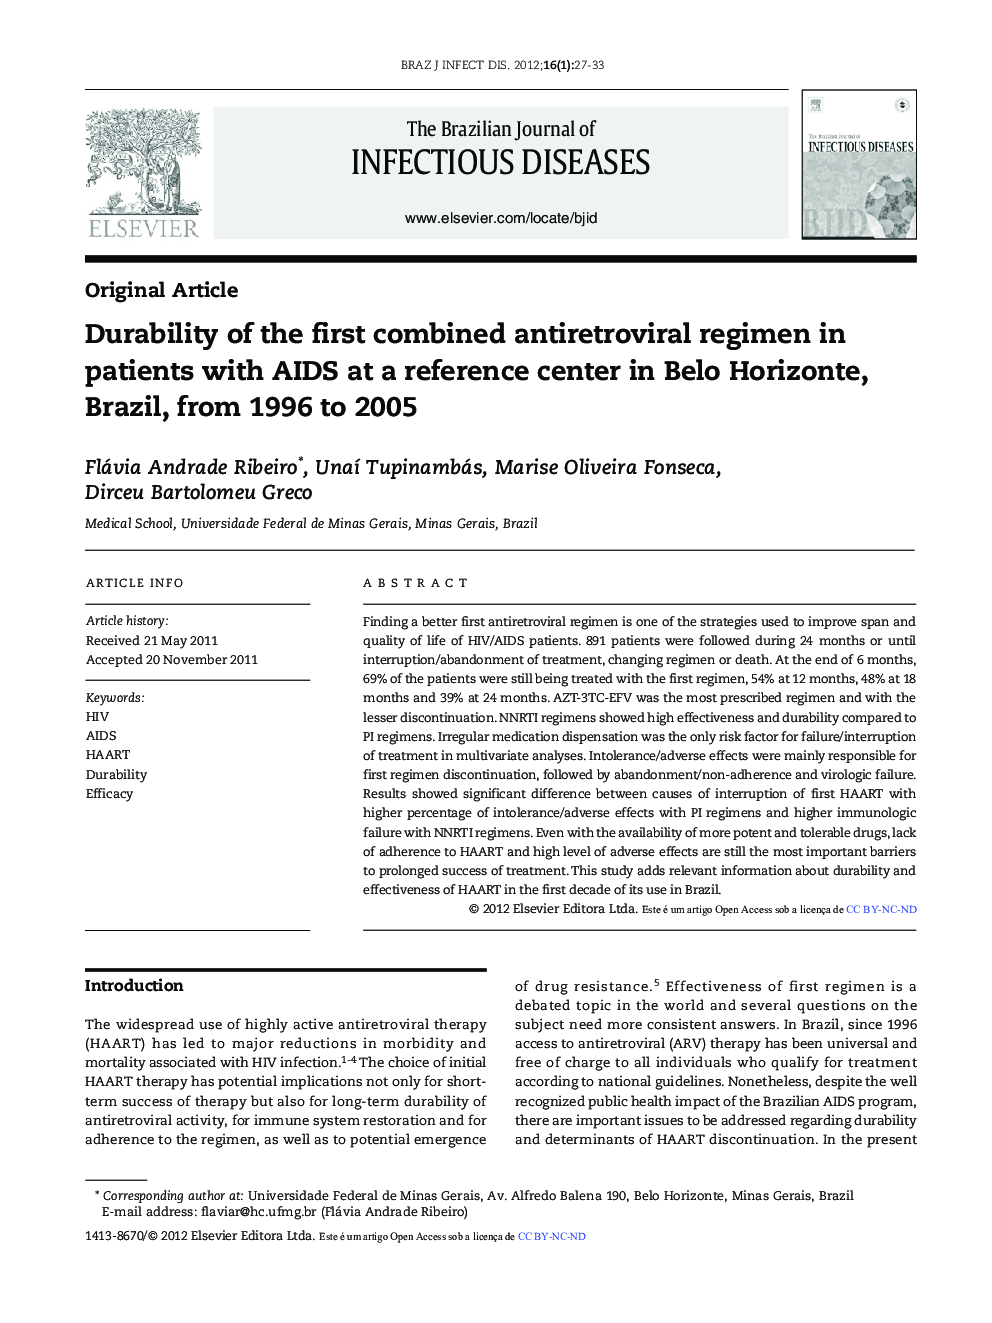 Durability of the first combined antiretroviral regimen in patients with AIDS at a reference center in Belo Horizonte, Brazil, from 1996 to 2005